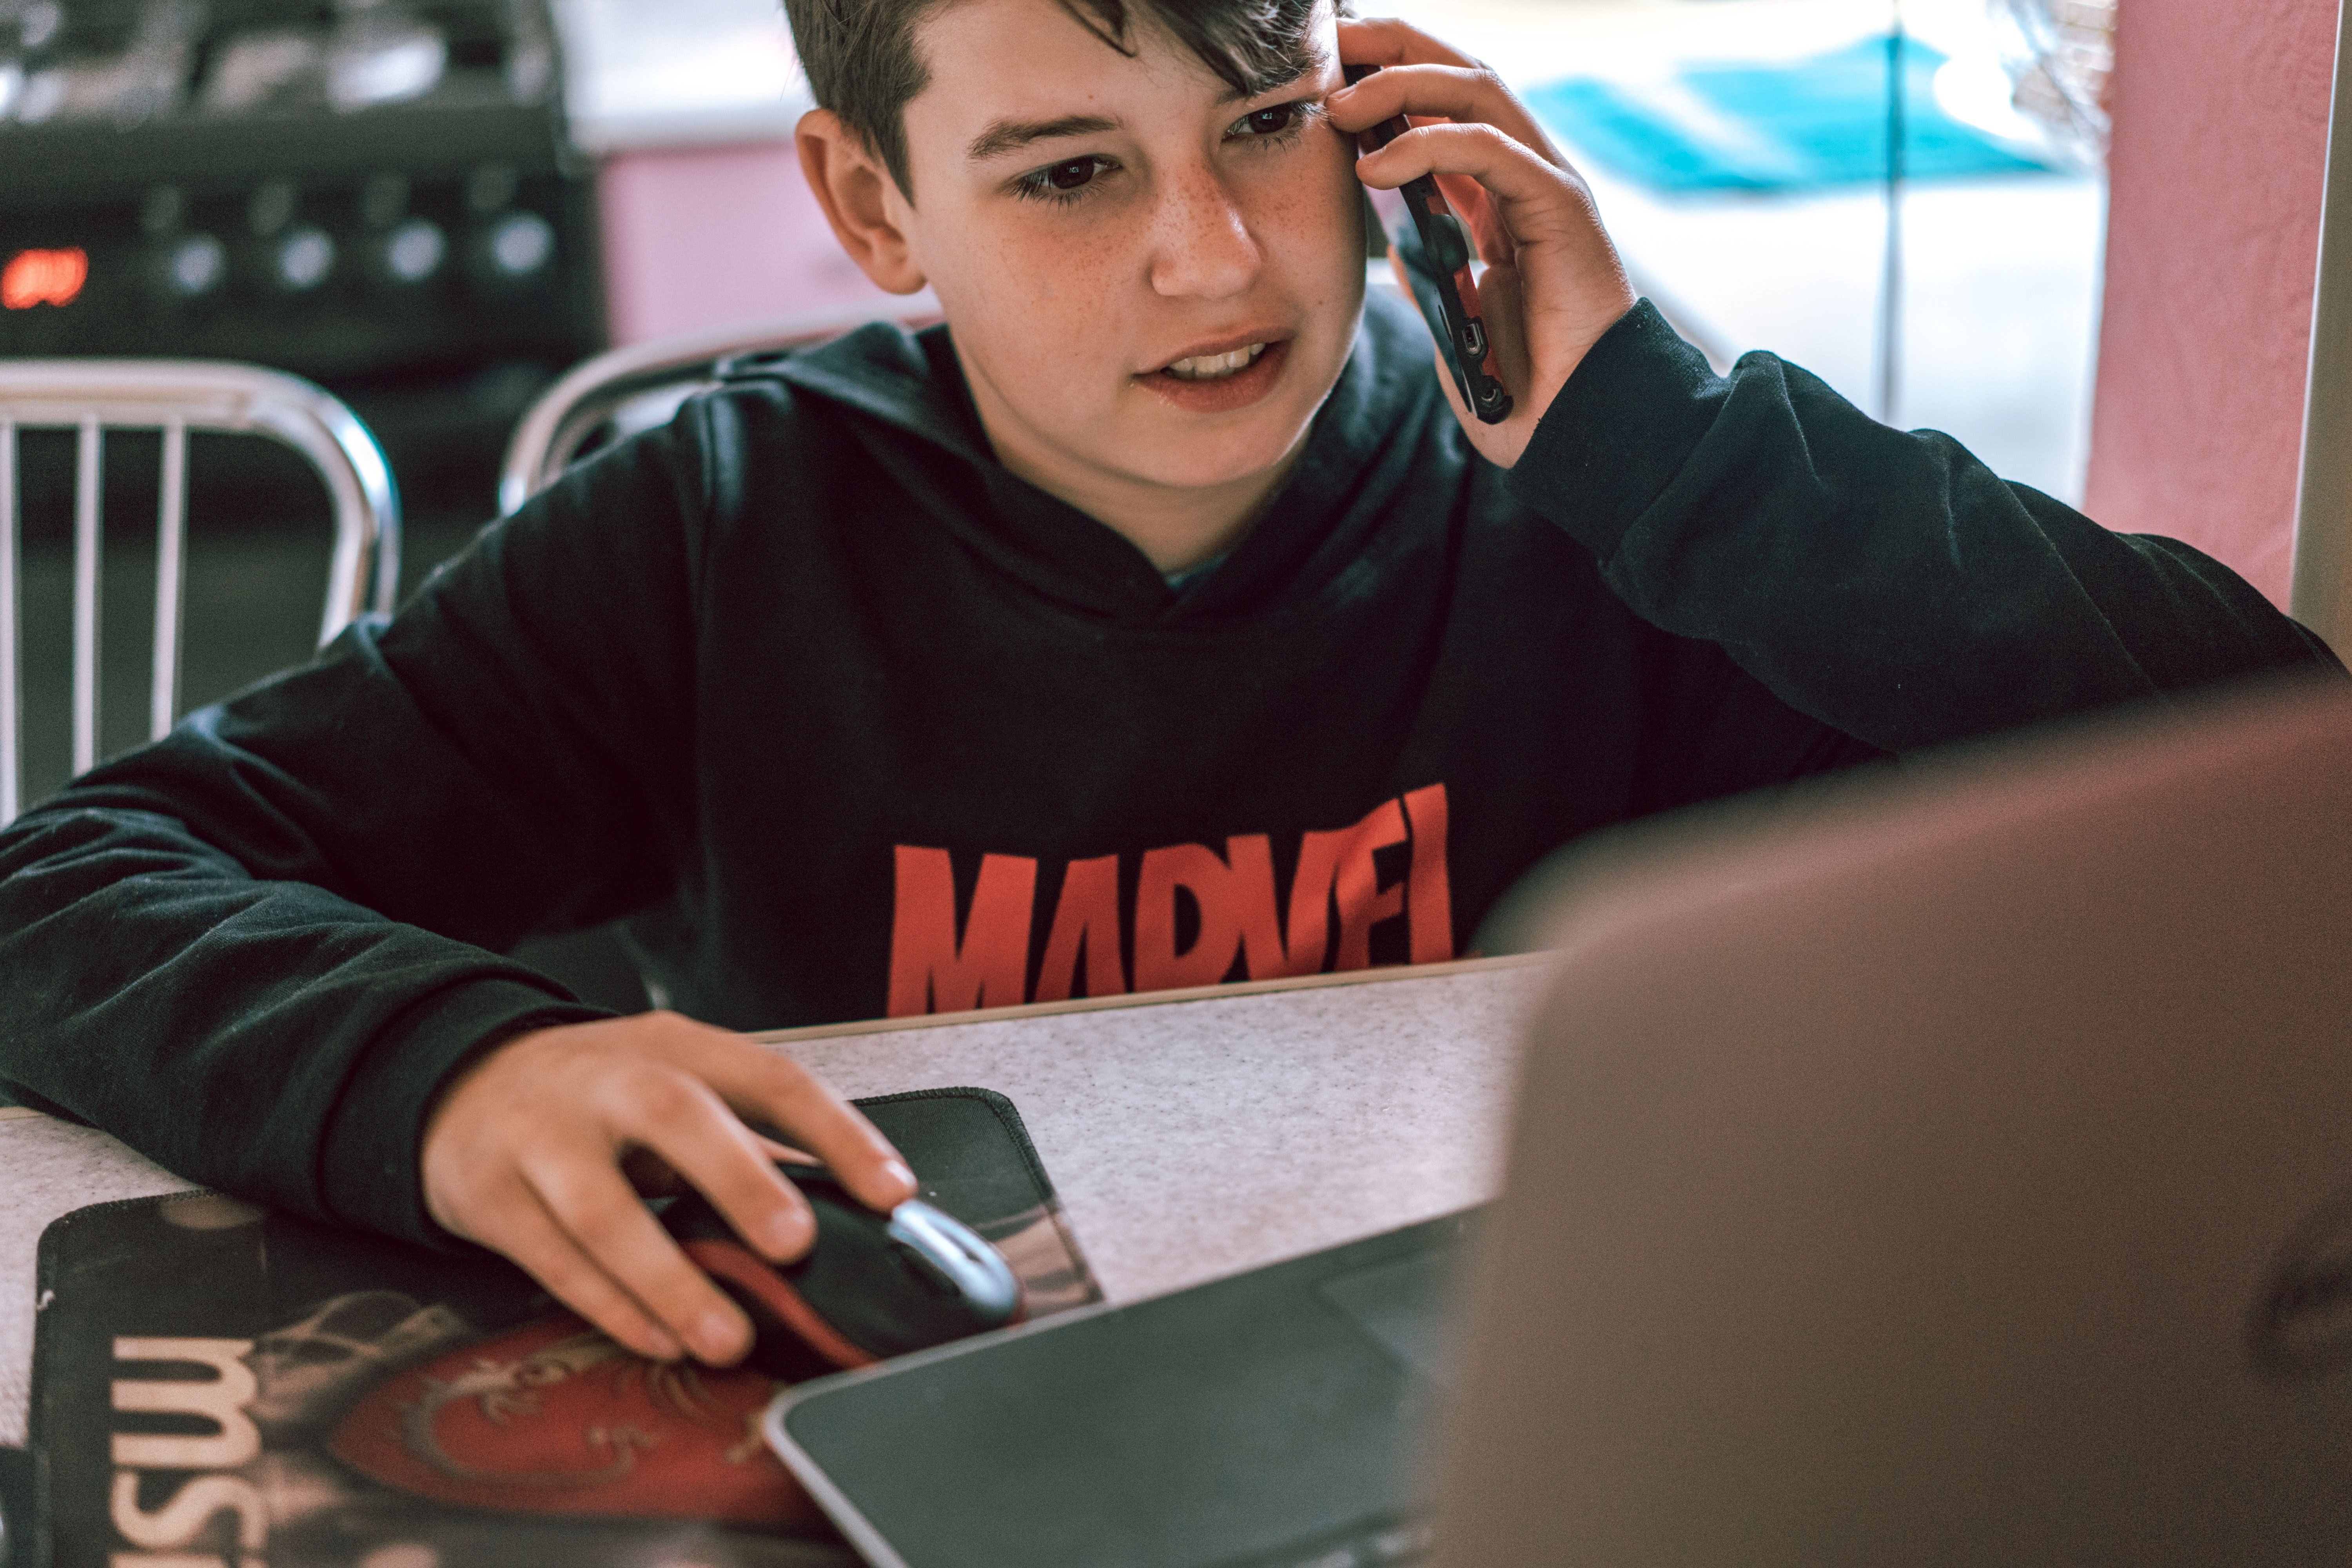 A boy placing a phone call while looking at a laptop screen | Source: Pexels